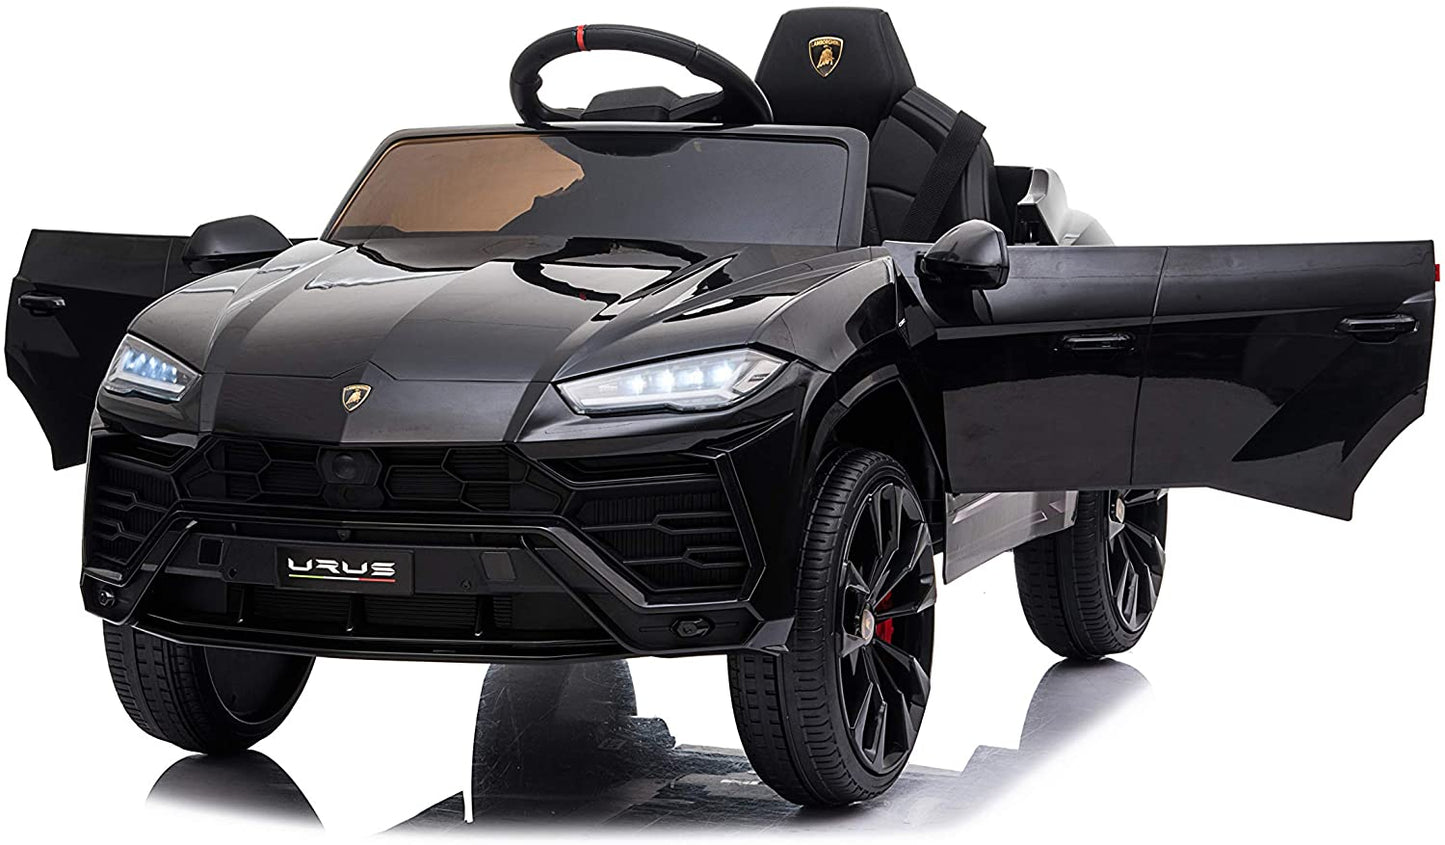 Black Lamborghini Urus electric ride-on toy car with open doors for kids